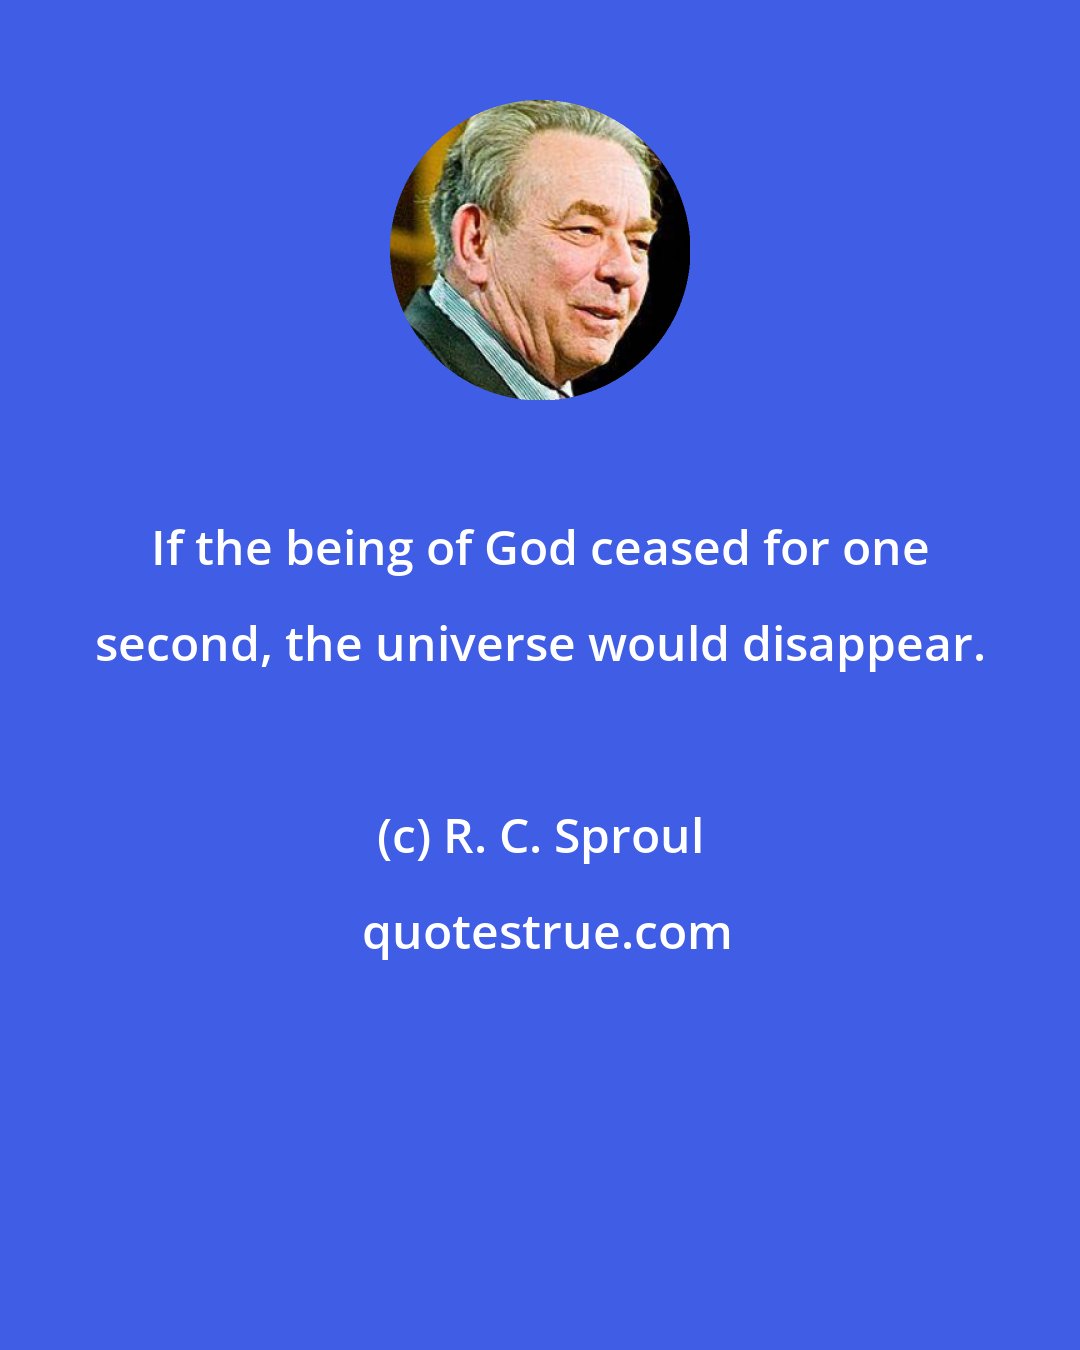 R. C. Sproul: If the being of God ceased for one second, the universe would disappear.